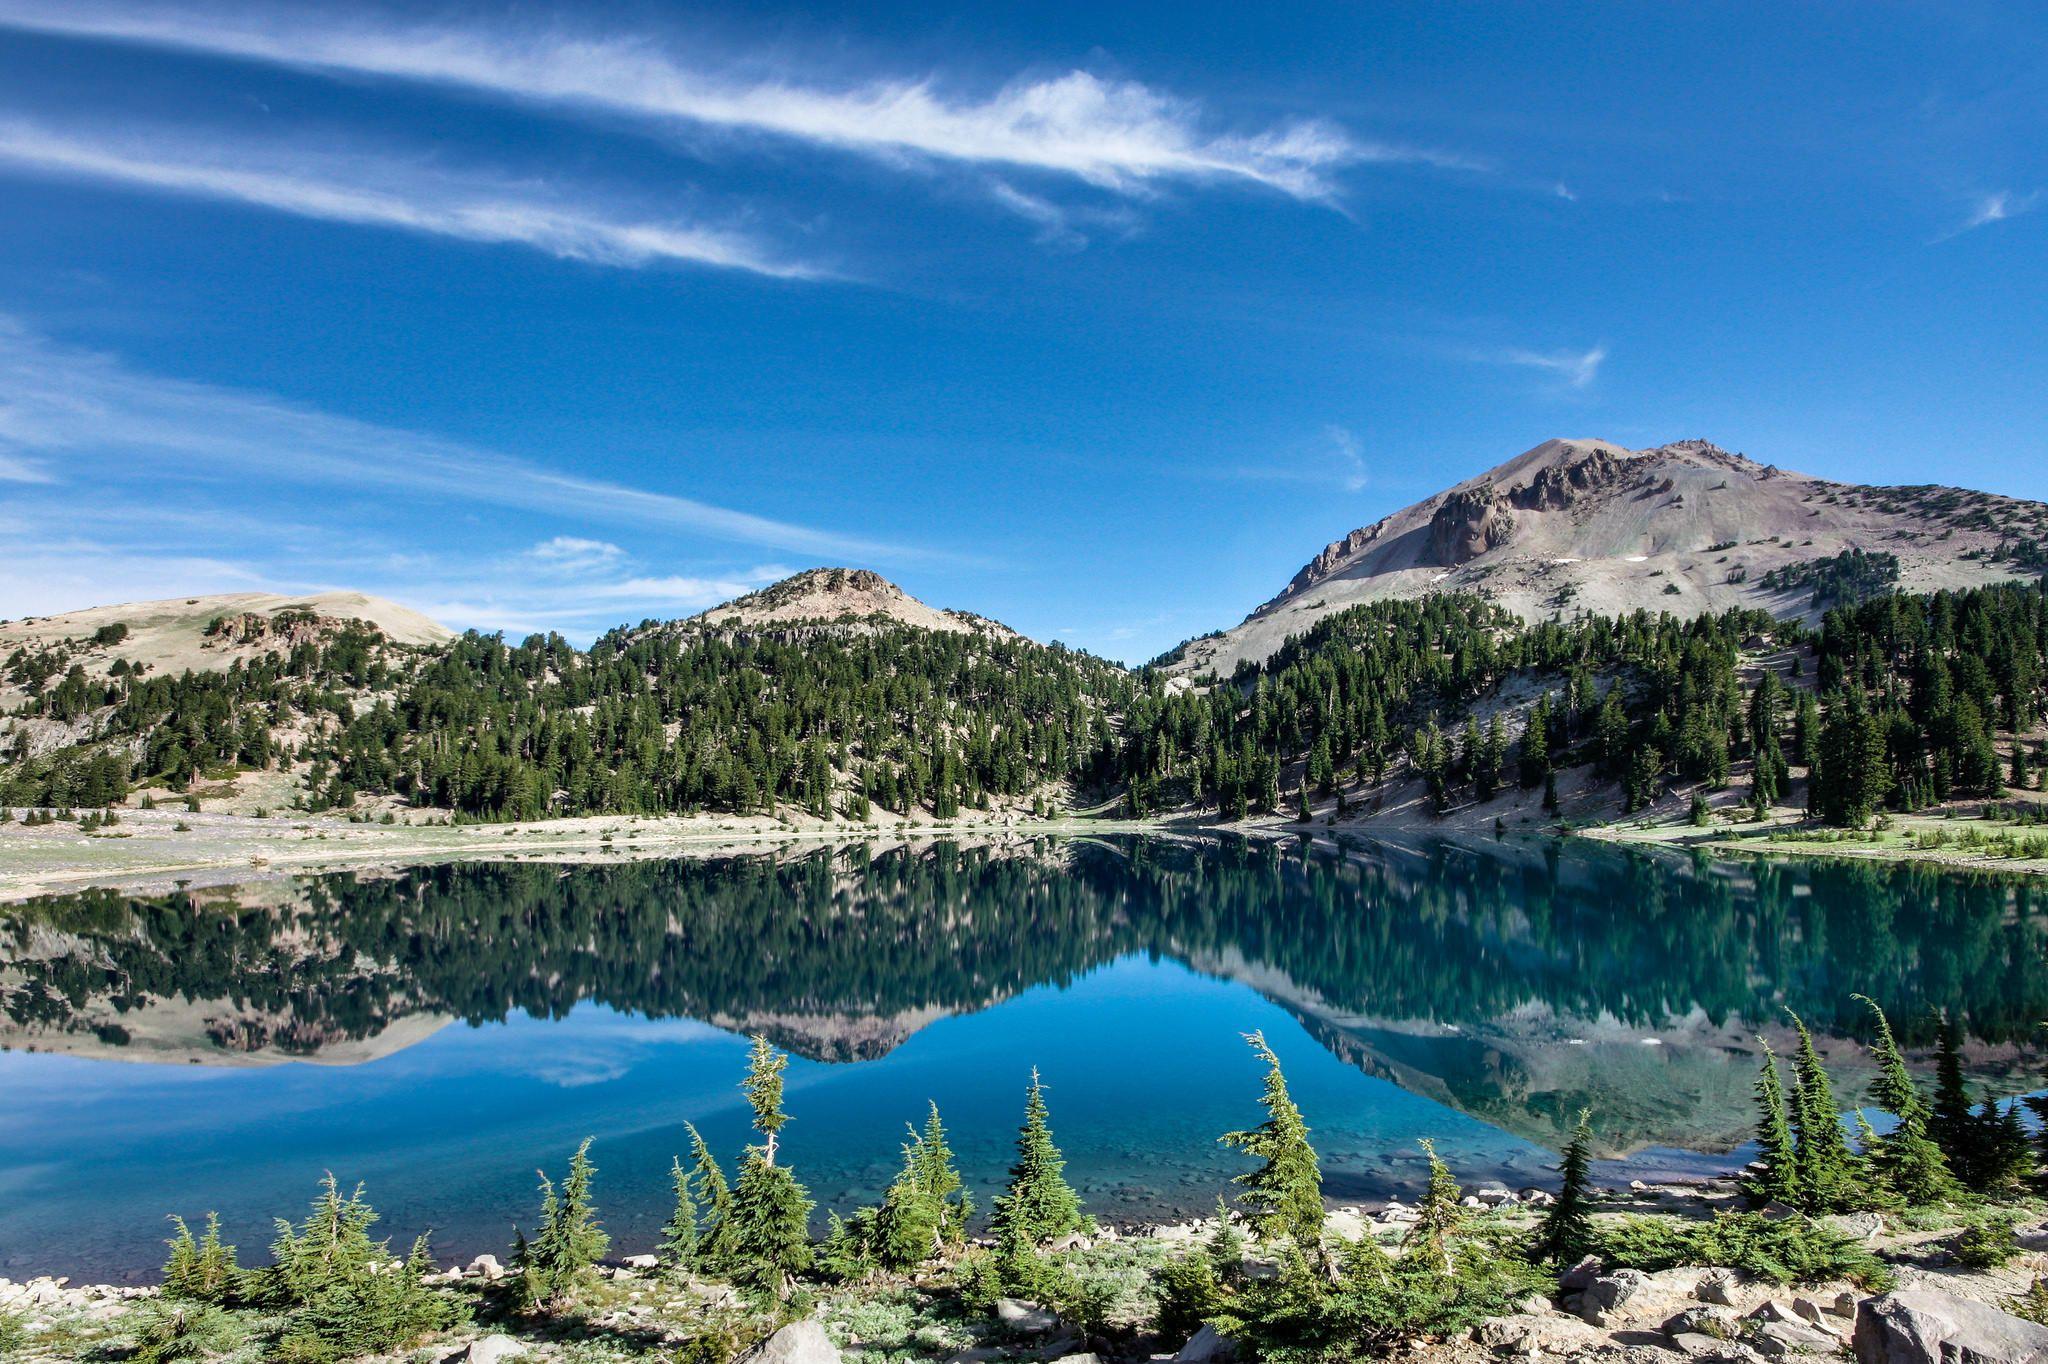 Up The Road: Lassen Volcanic National Park